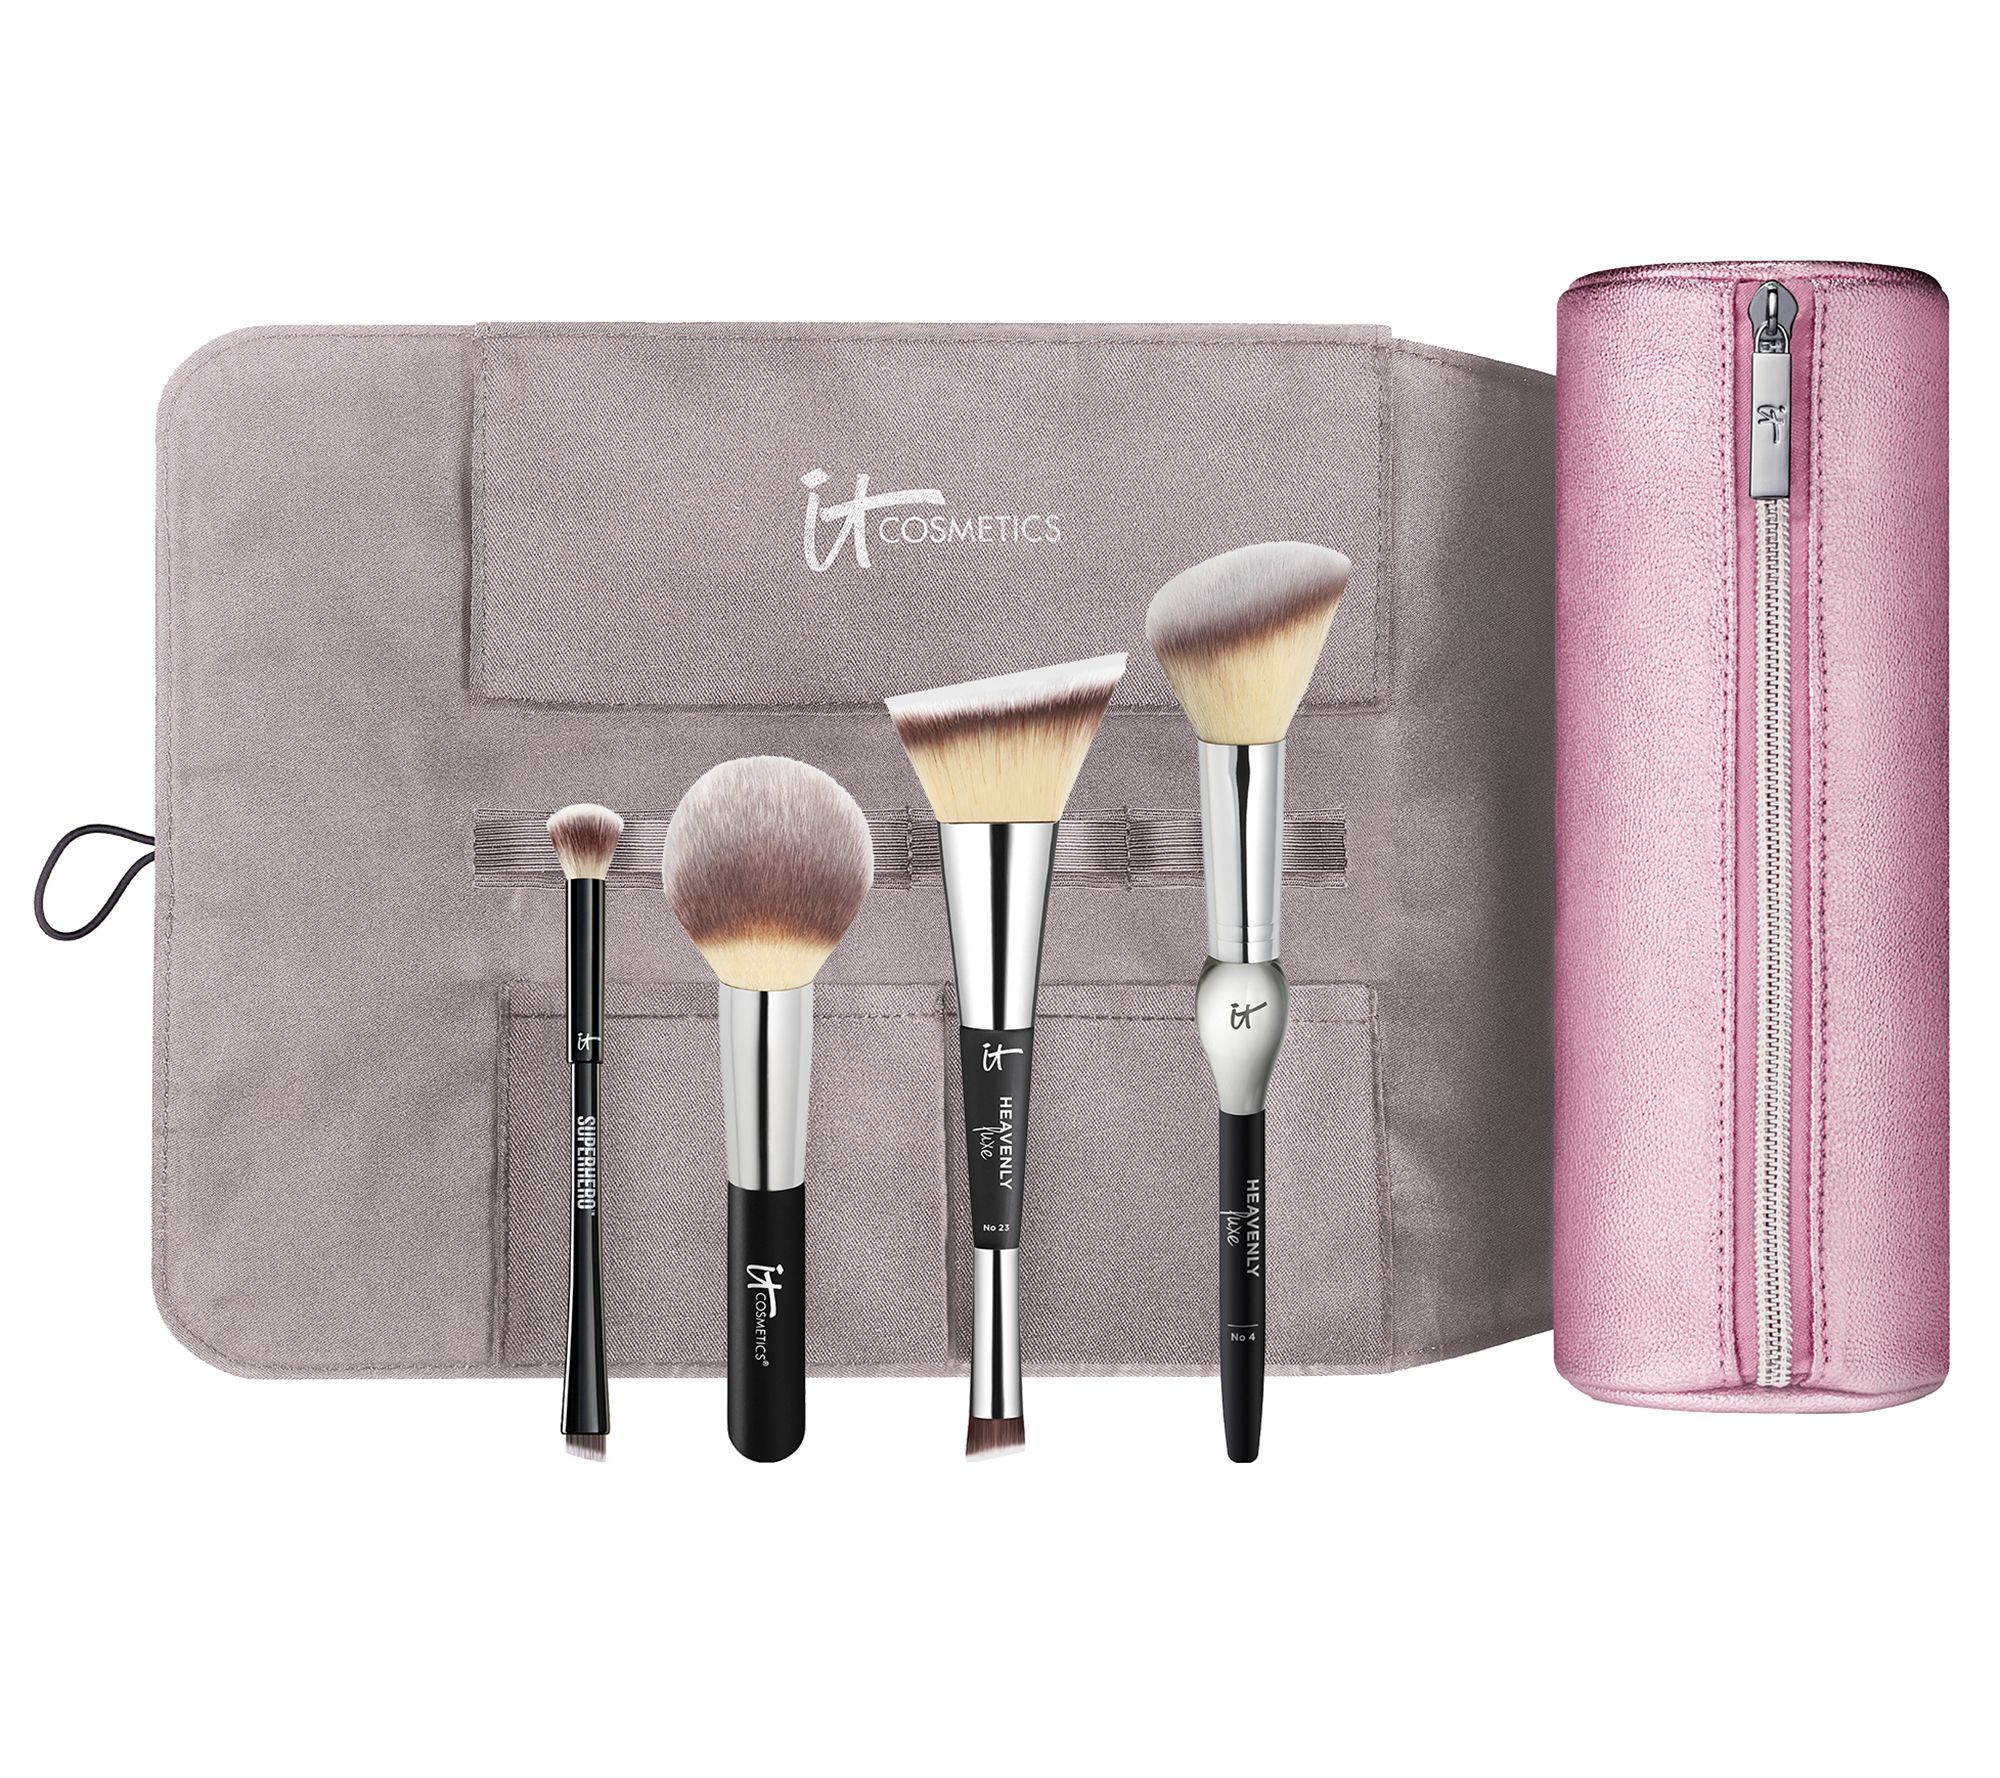 IT Cosmetics Special Edition Luxe Brush Set with Brush Roll Makeup Bag | QVC